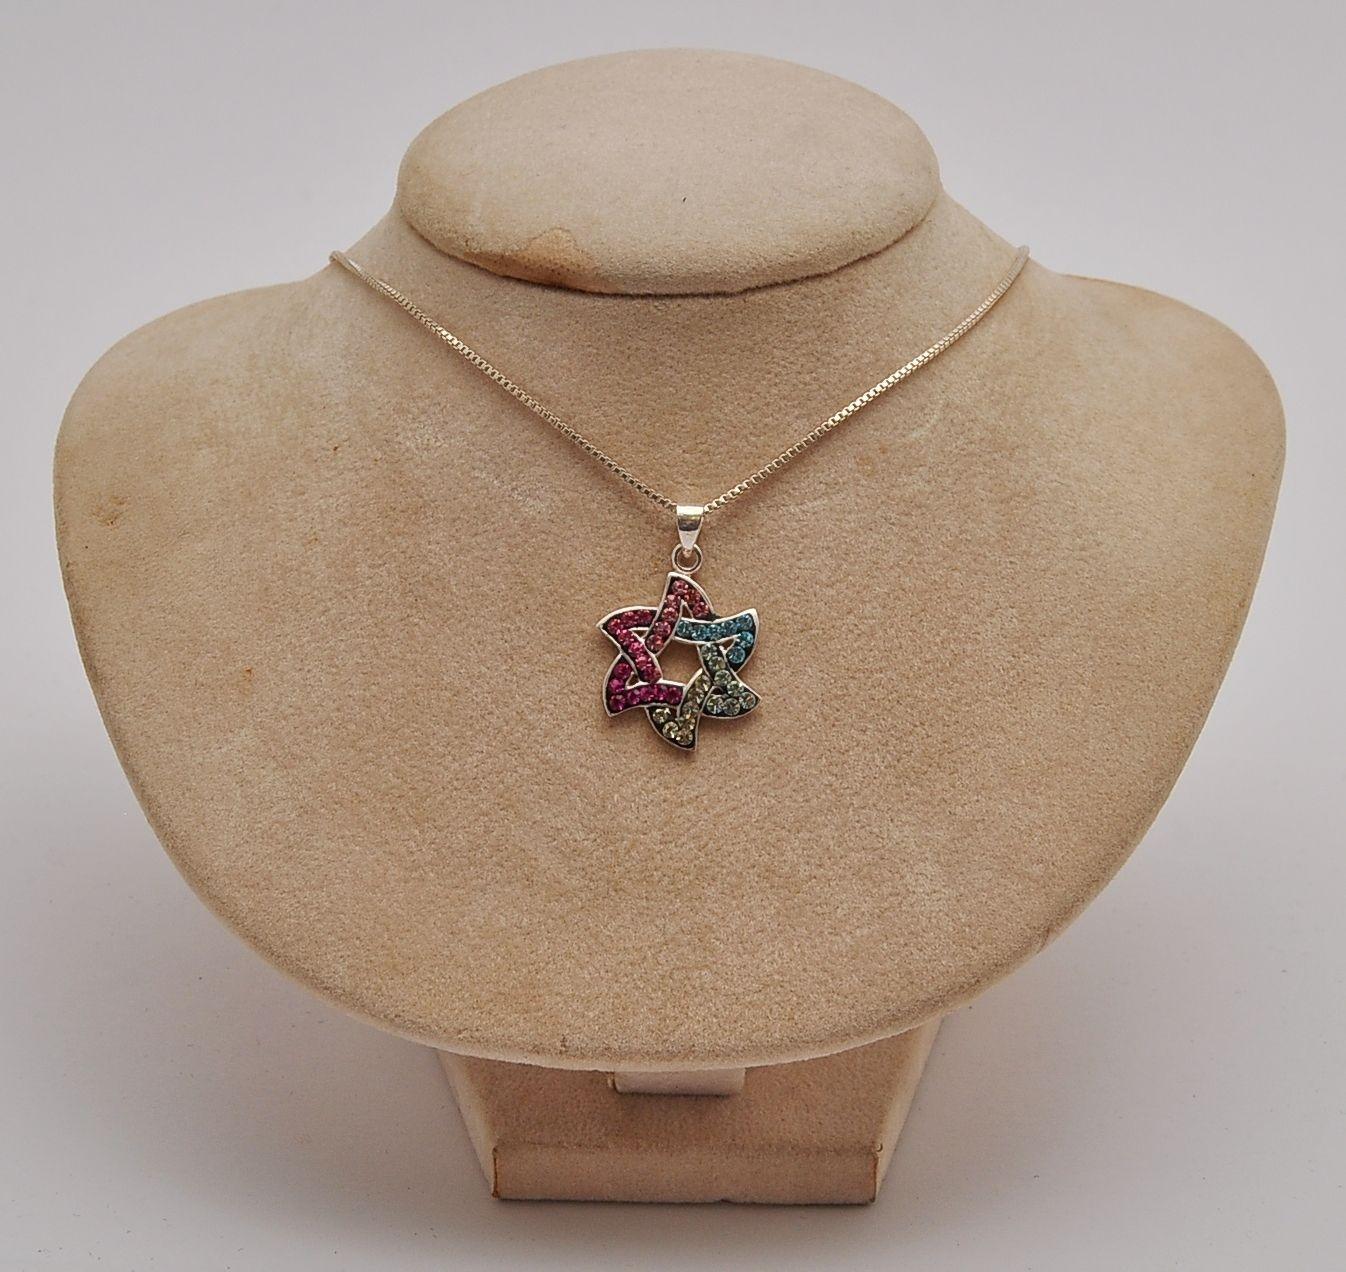 Star Of David Pendant With Multi Colors Gemstones Sterling Silver 925 Necklace - Spring Nahal